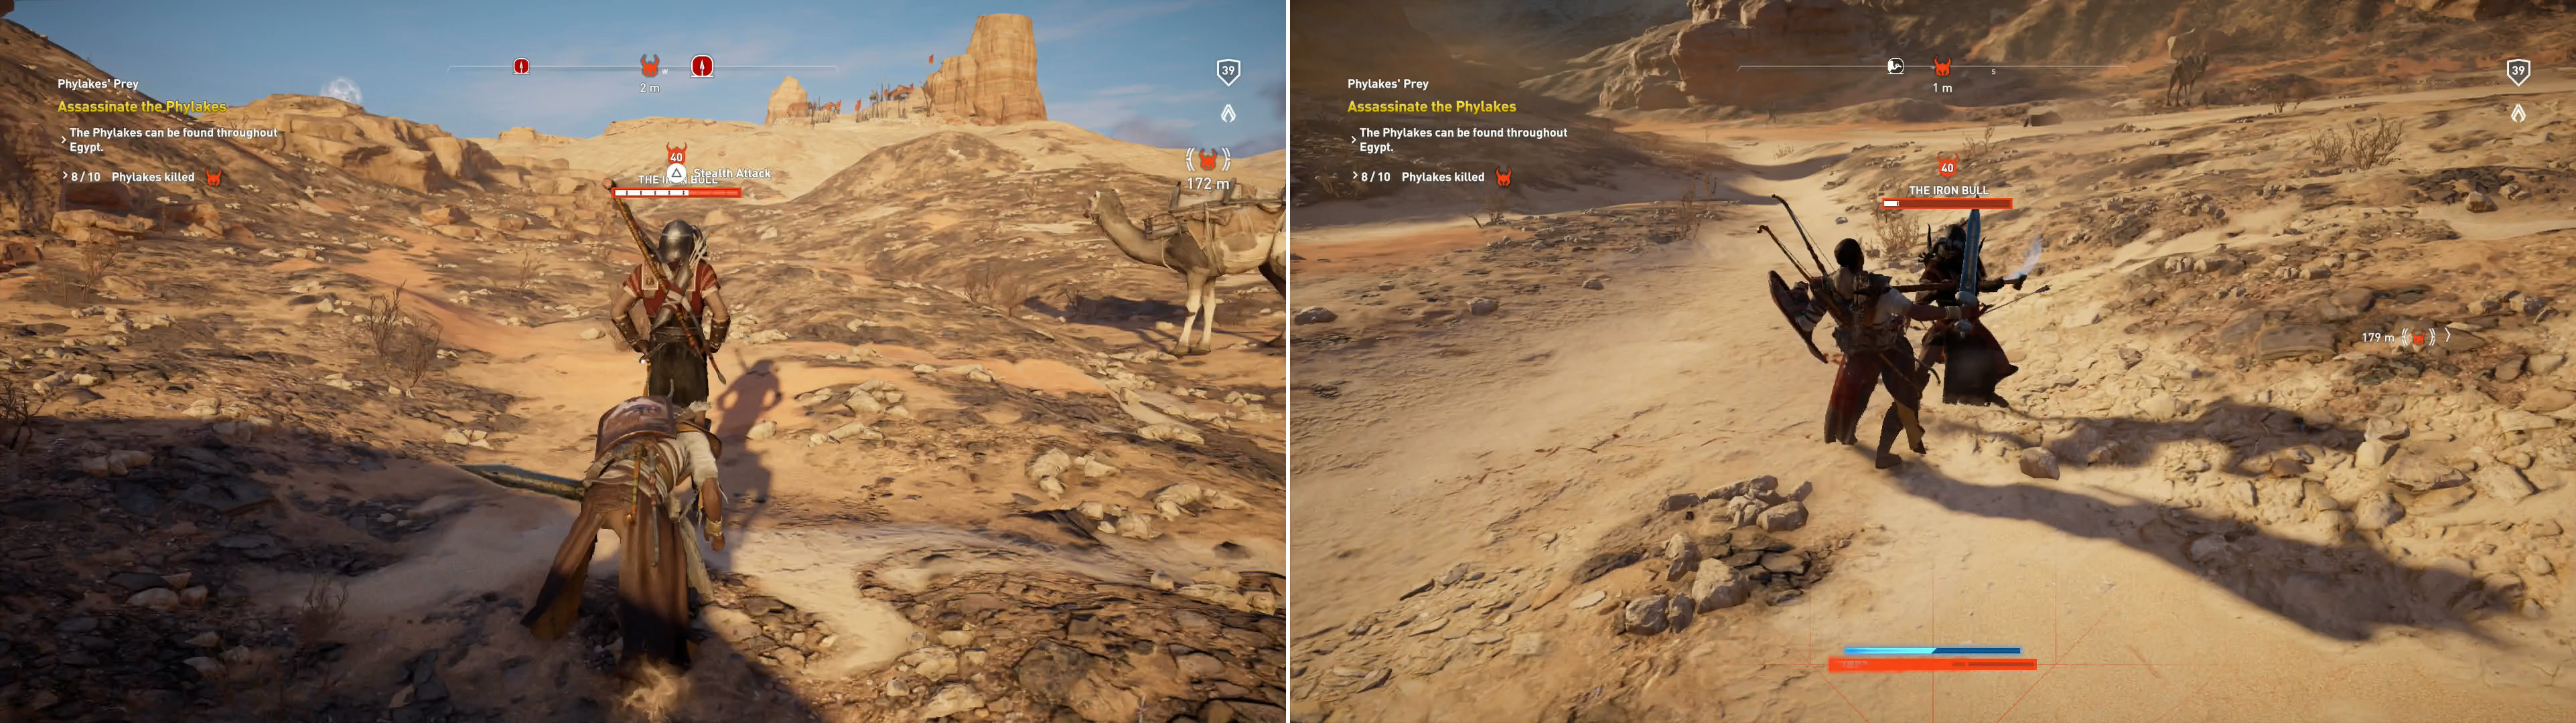 Sneak up on your prey - the massive damage to start out the fight will help (left). The Iron Bull's reach and attack speed makes him a dangerous foe in melee combat (right).